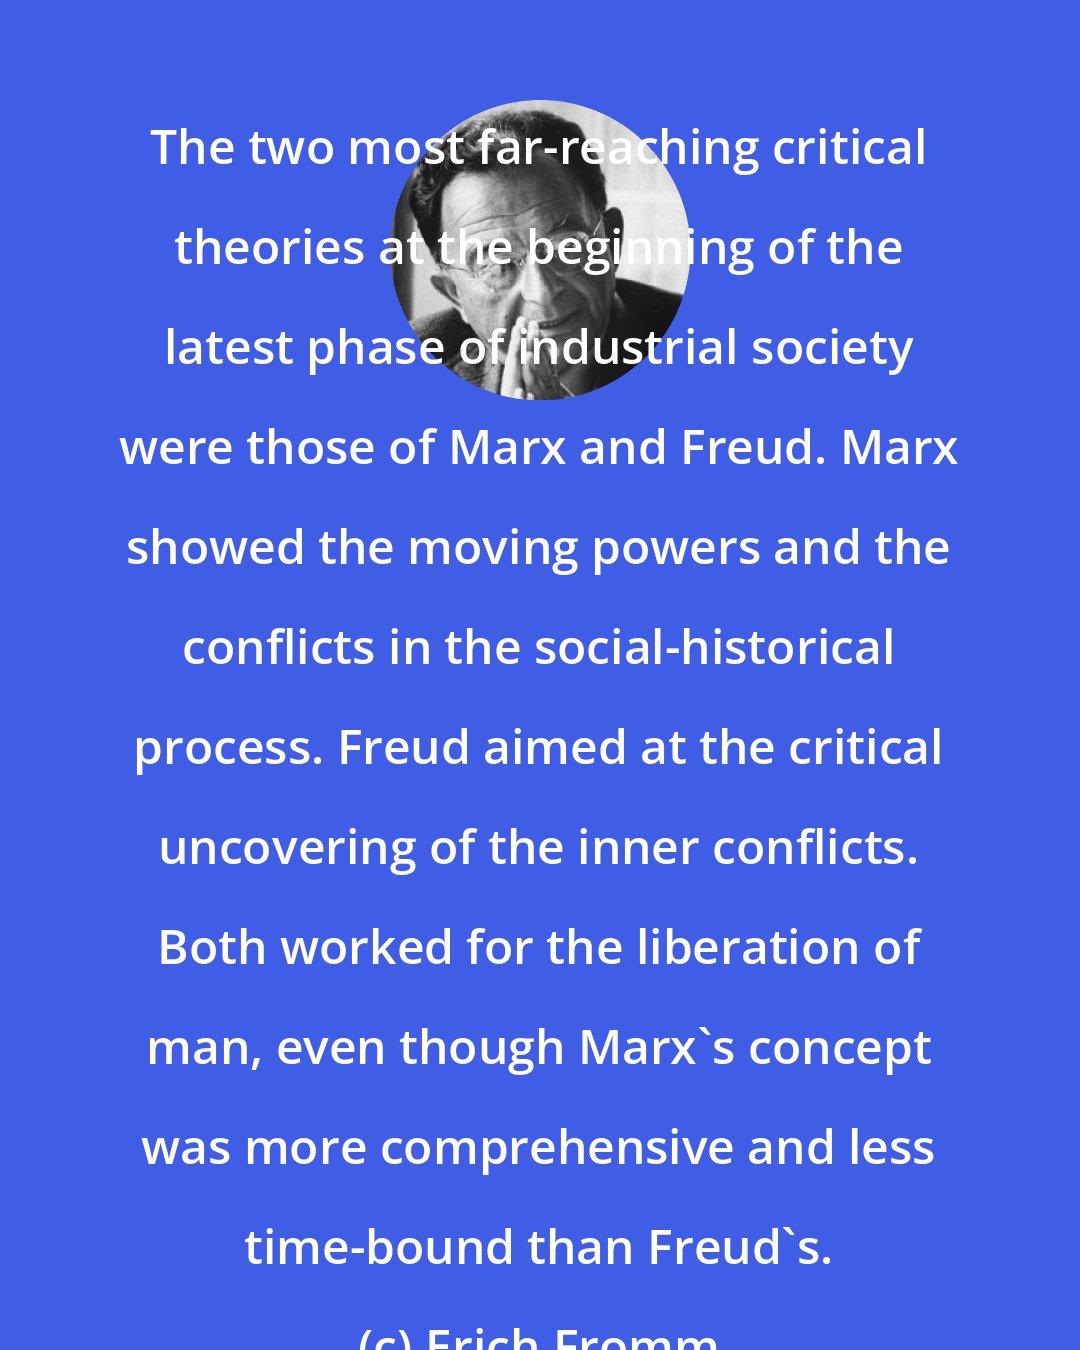 Erich Fromm: The two most far-reaching critical theories at the beginning of the latest phase of industrial society were those of Marx and Freud. Marx showed the moving powers and the conflicts in the social-historical process. Freud aimed at the critical uncovering of the inner conflicts. Both worked for the liberation of man, even though Marx's concept was more comprehensive and less time-bound than Freud's.